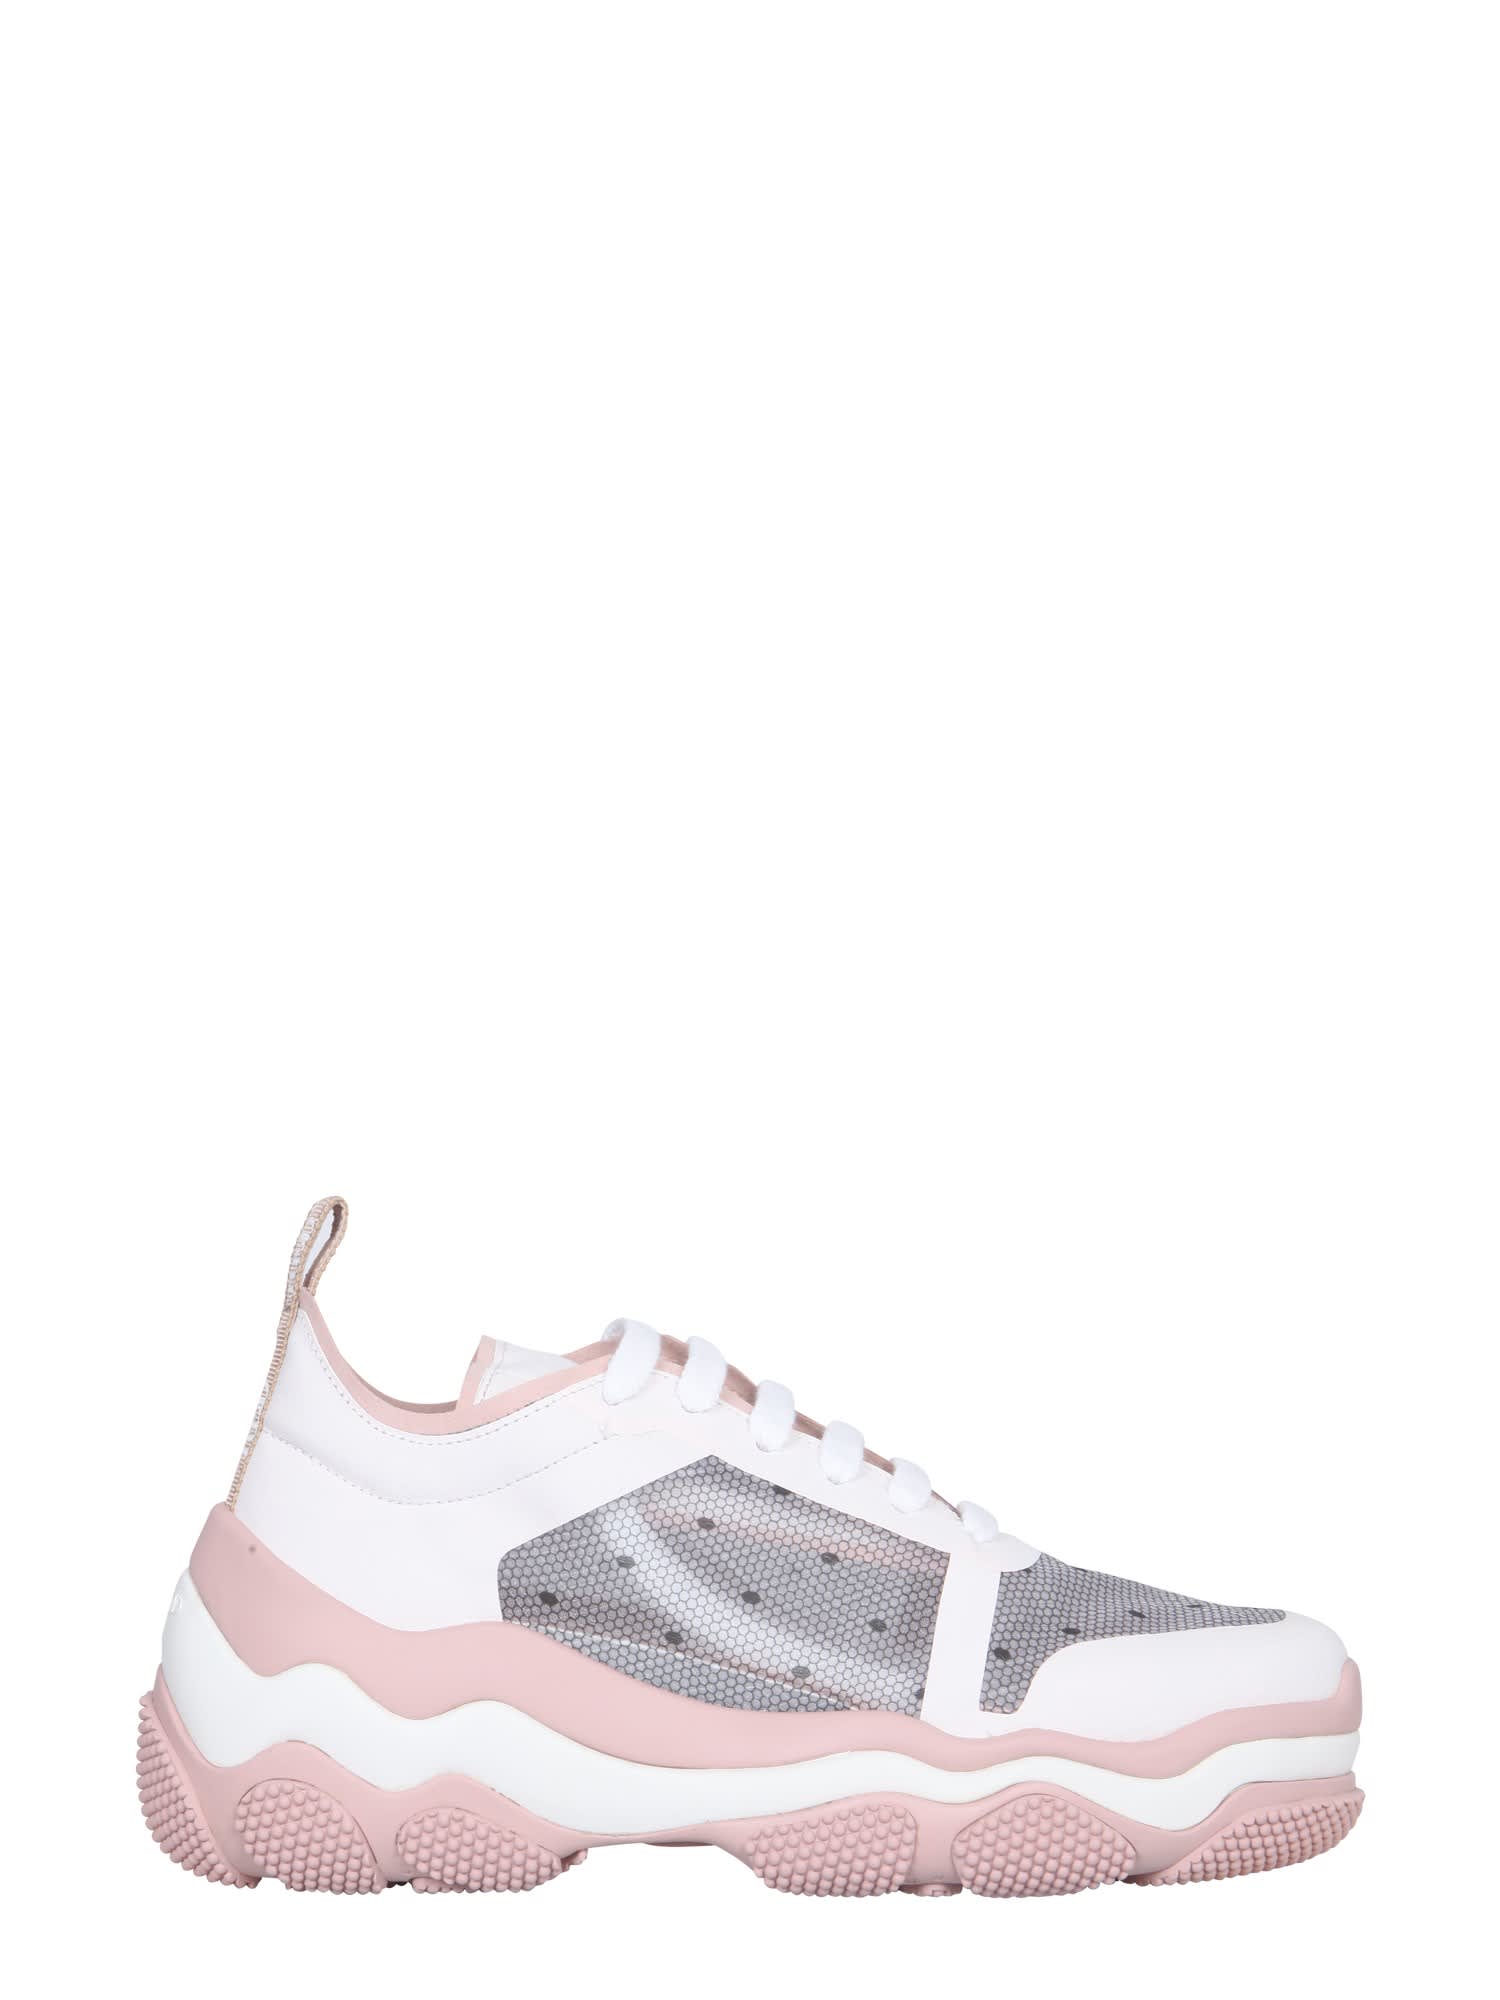 RED Valentino Glam Run Lace Sneakers